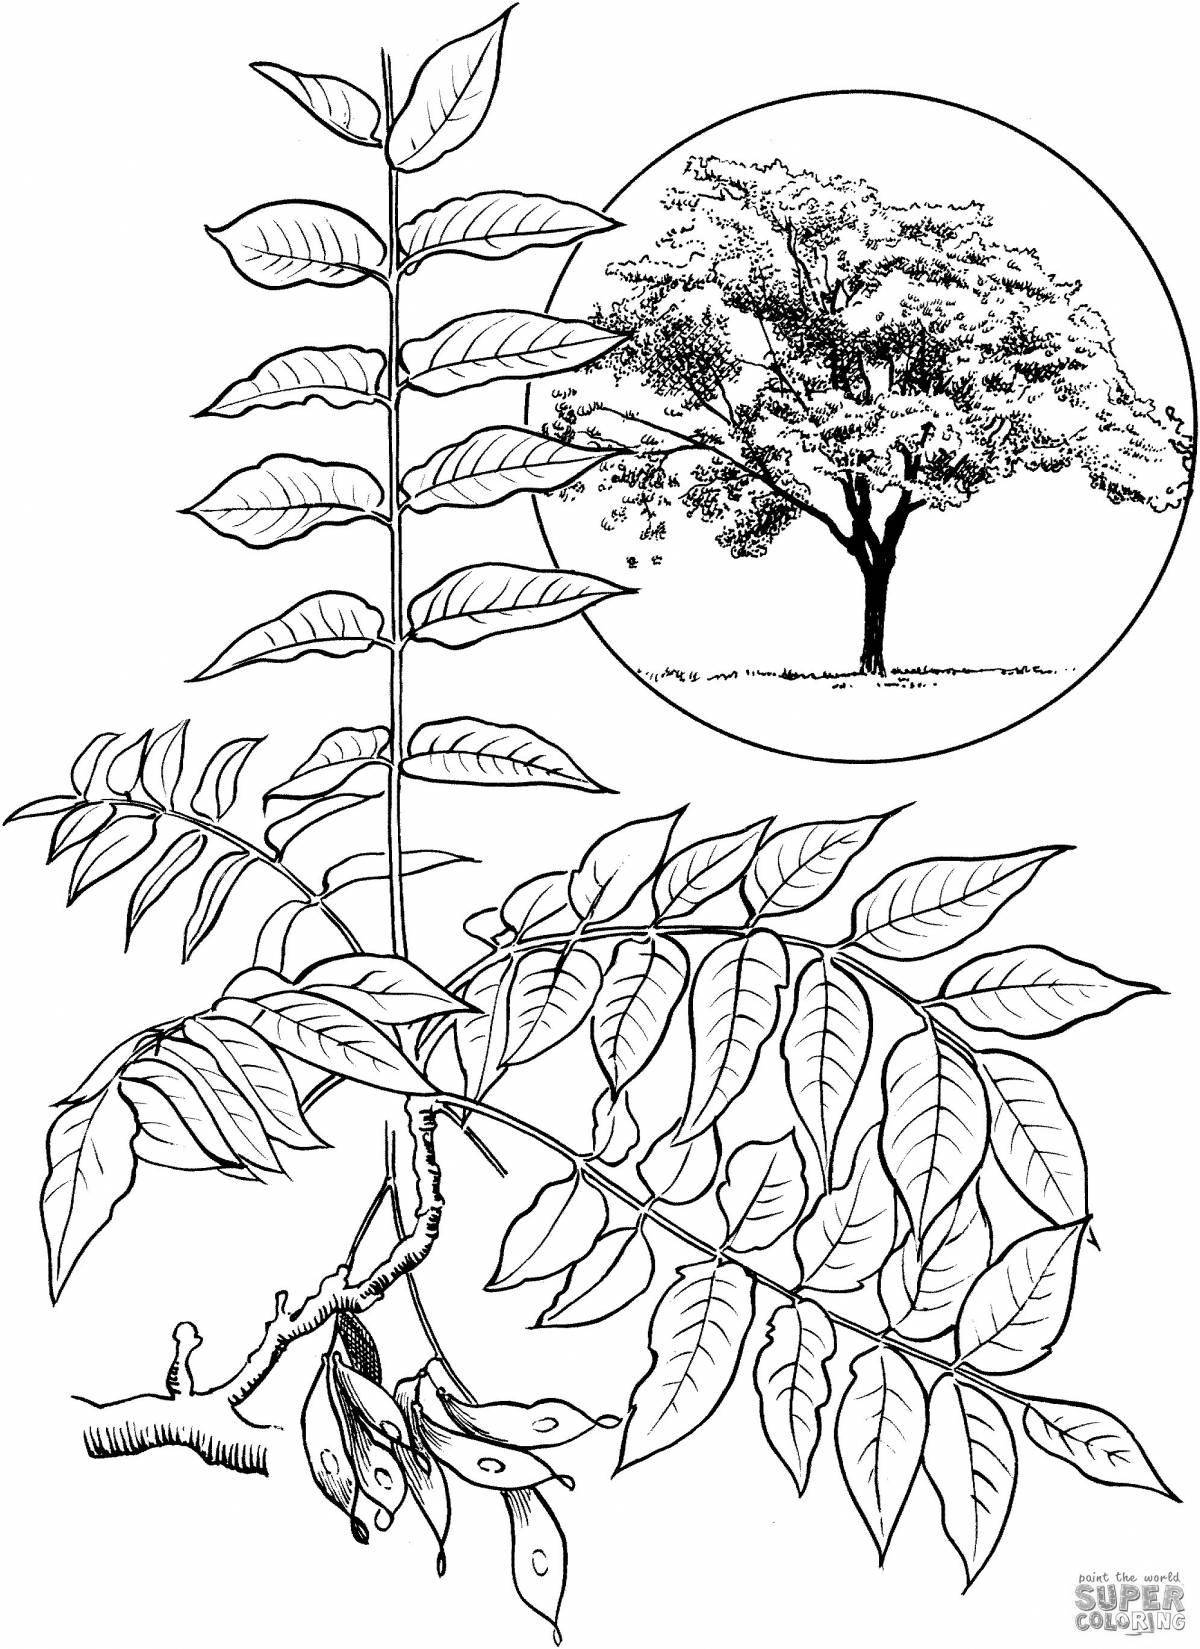 Awesome rowan coloring page